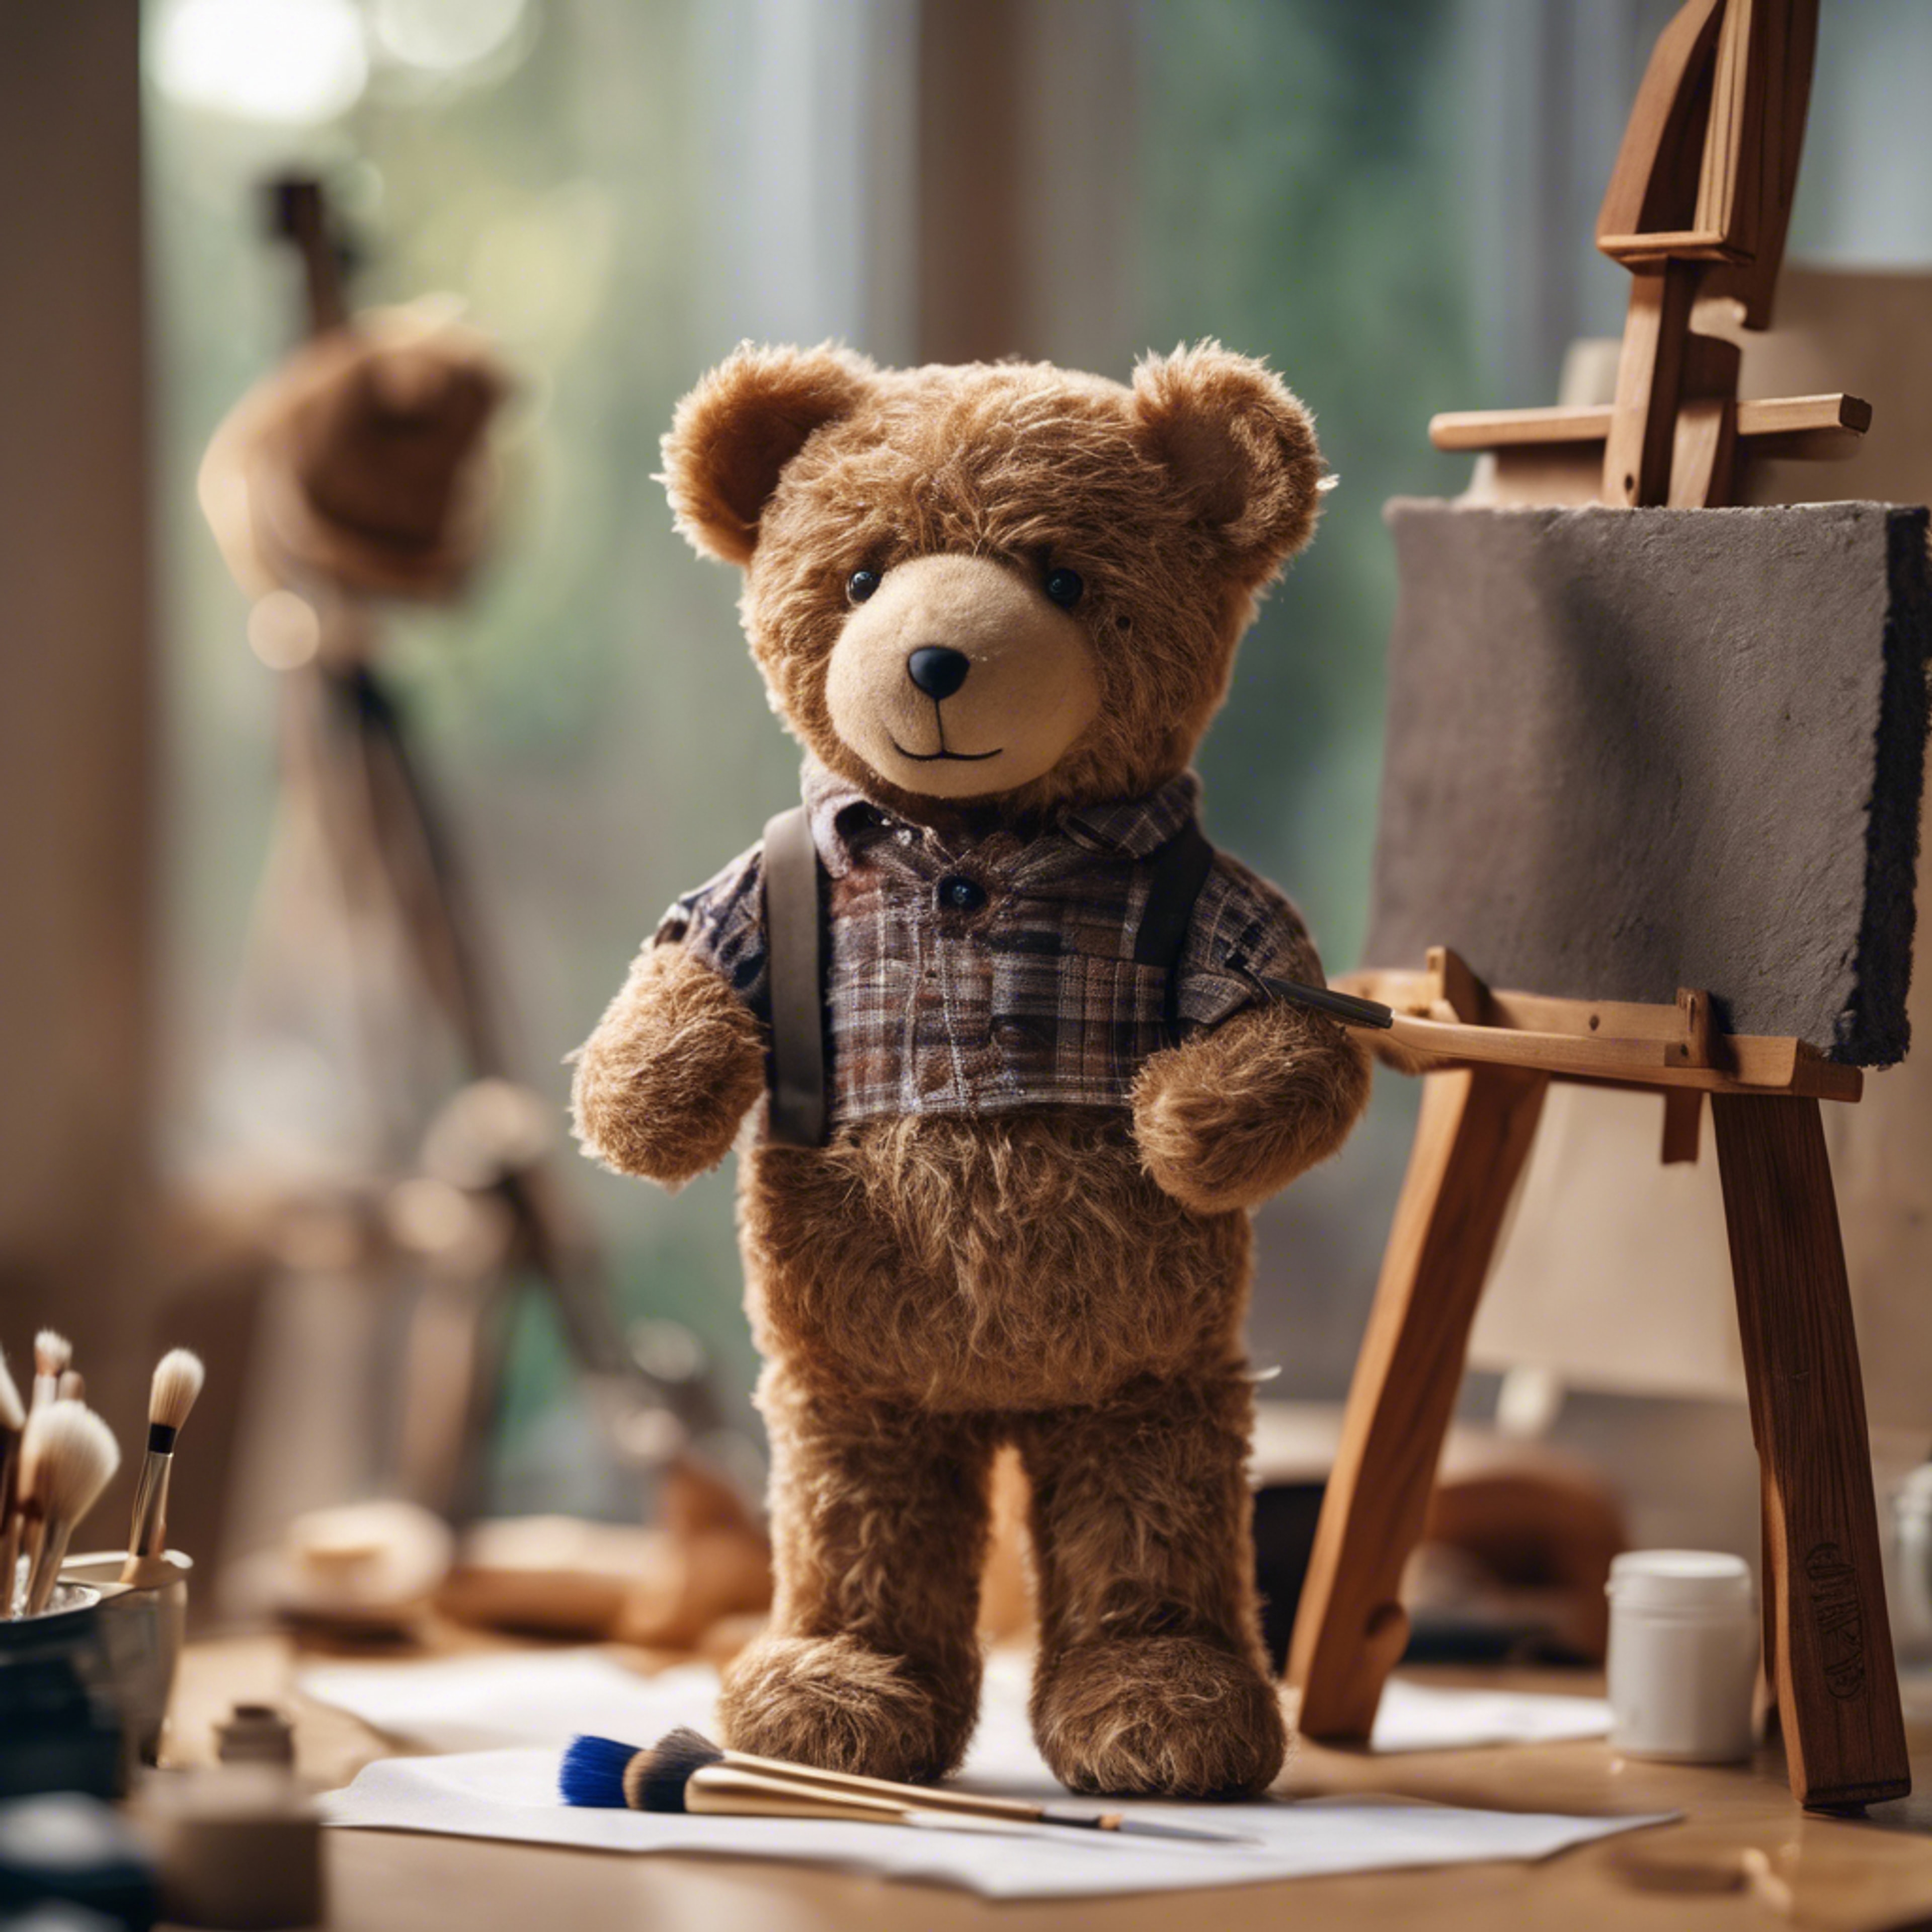 A teddy bear artist, standing in front of an easel, brush in hand.壁紙[d93bf6121a4d44c4a437]